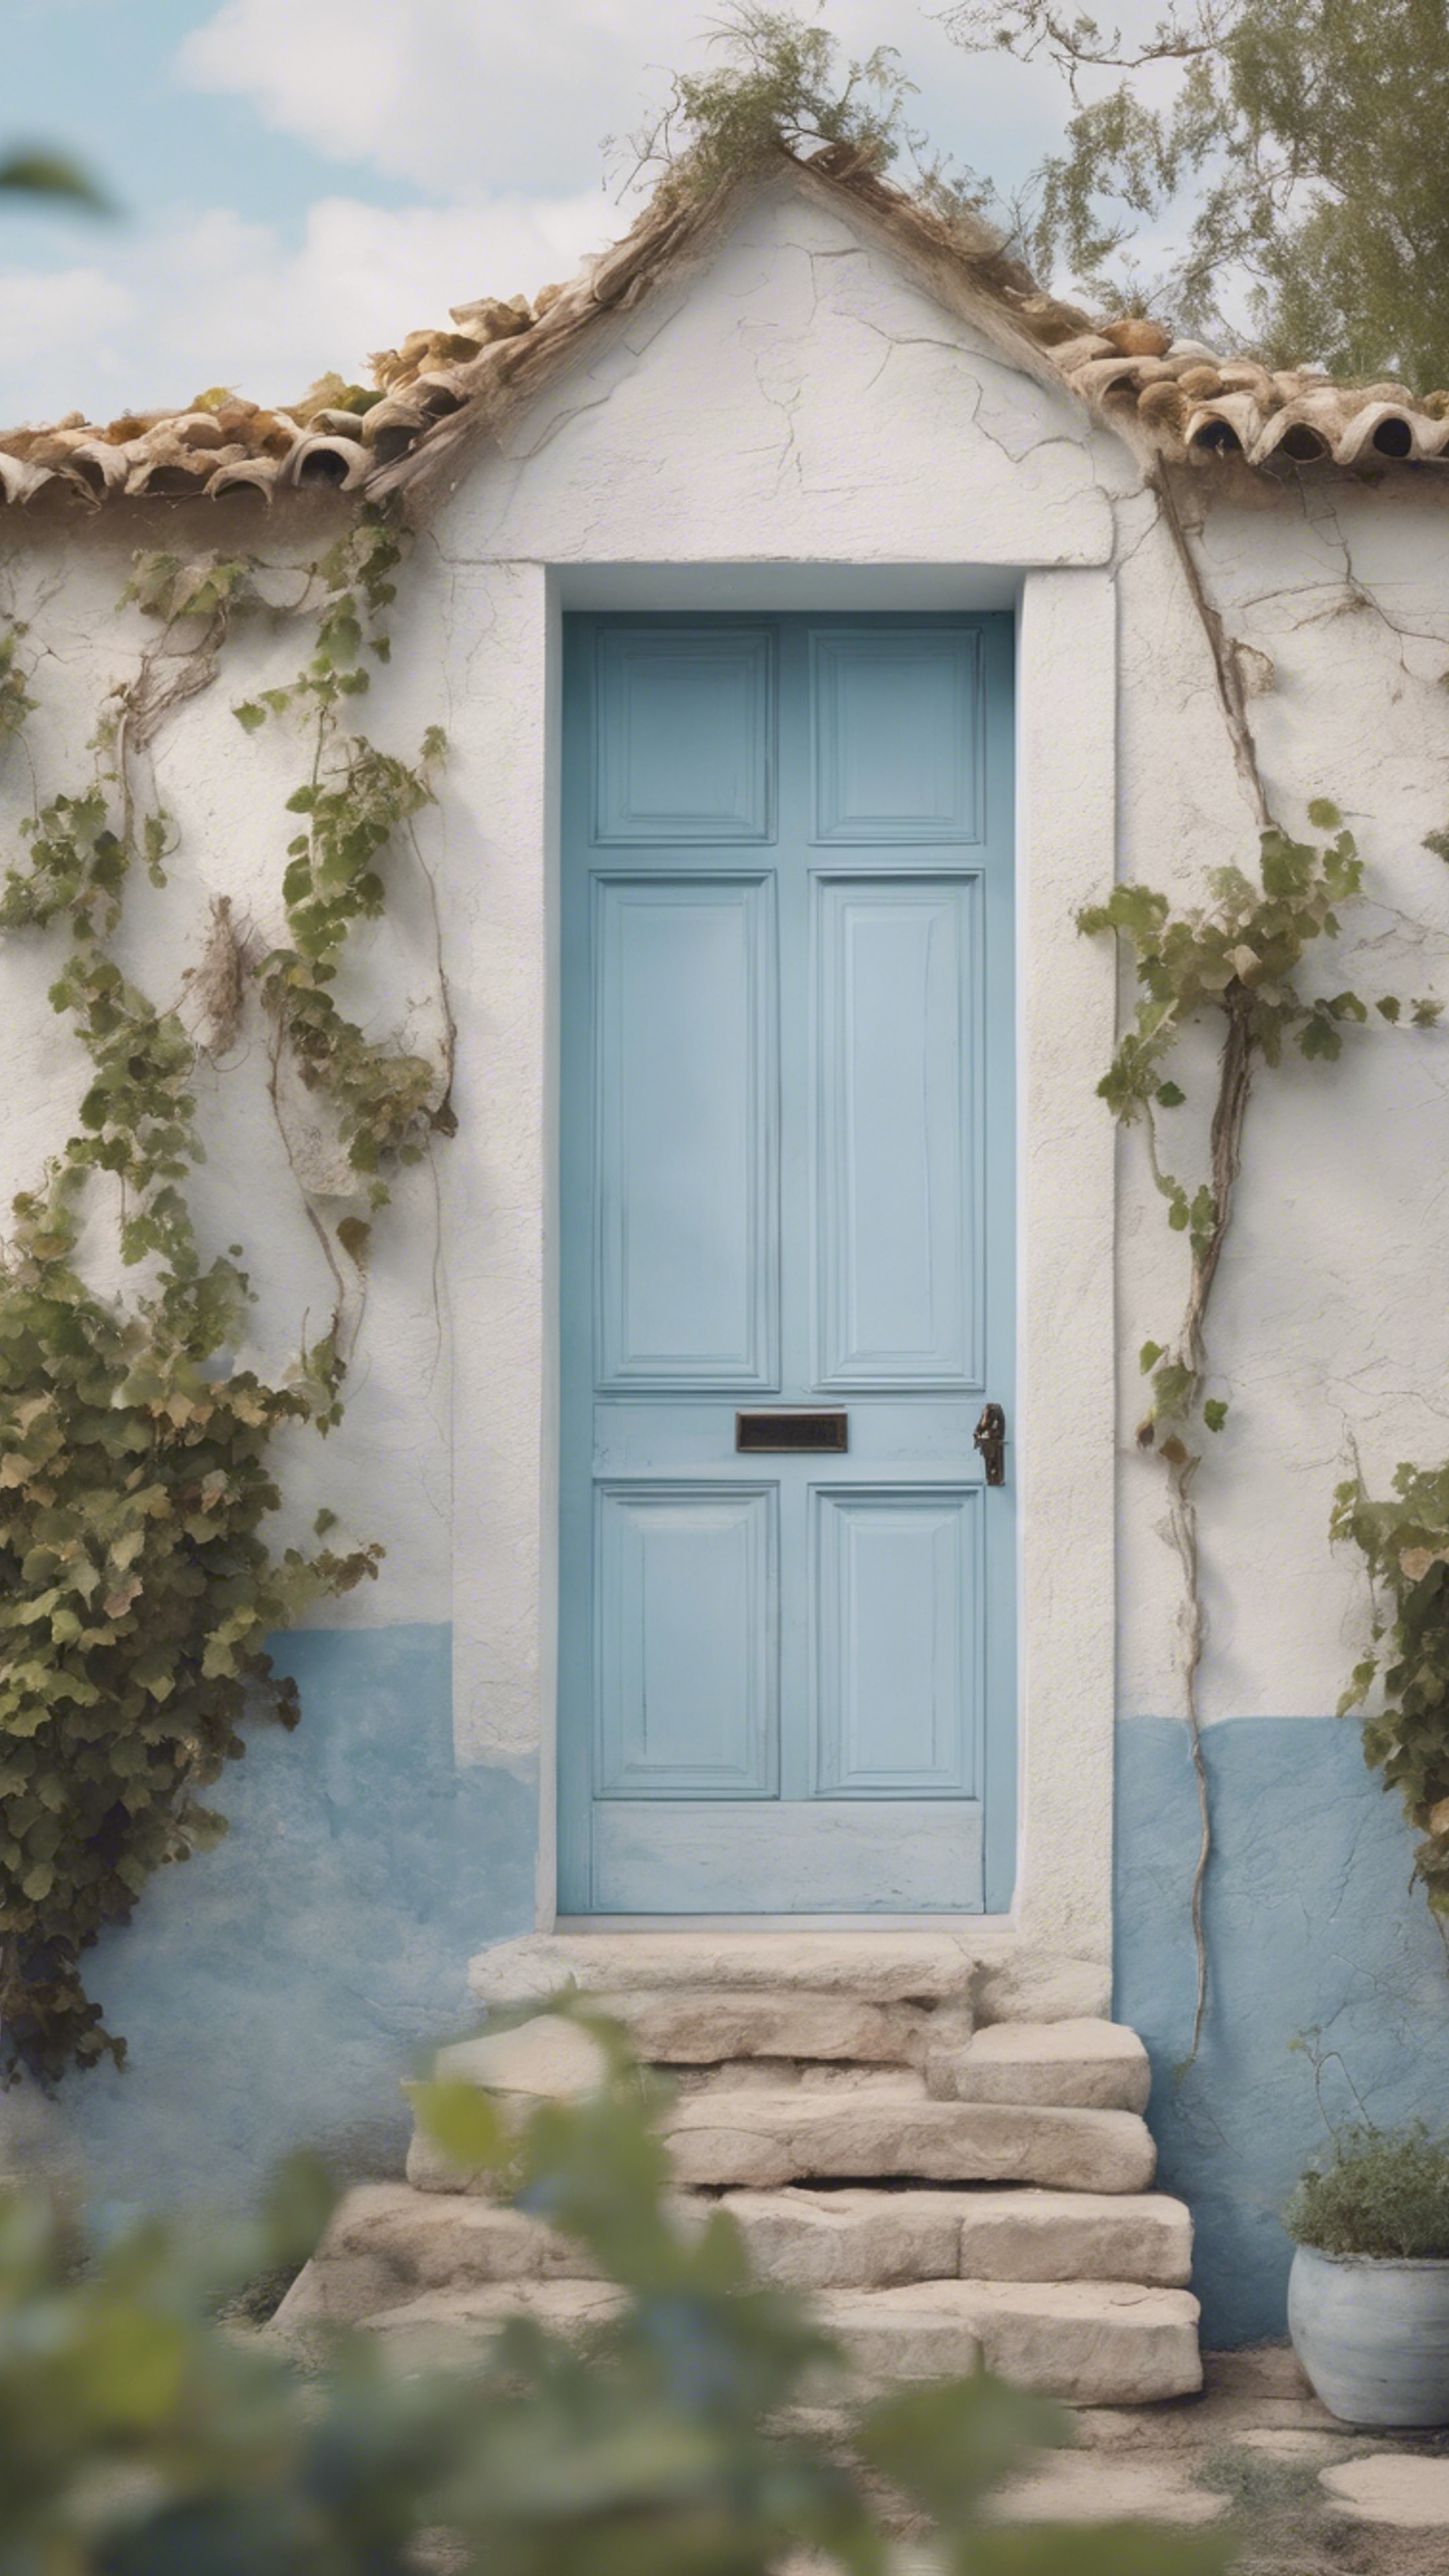 A pastel blue painted door on a rustic white house, a vineyard in the background. Wallpaper[5cba61123f91494ab86f]